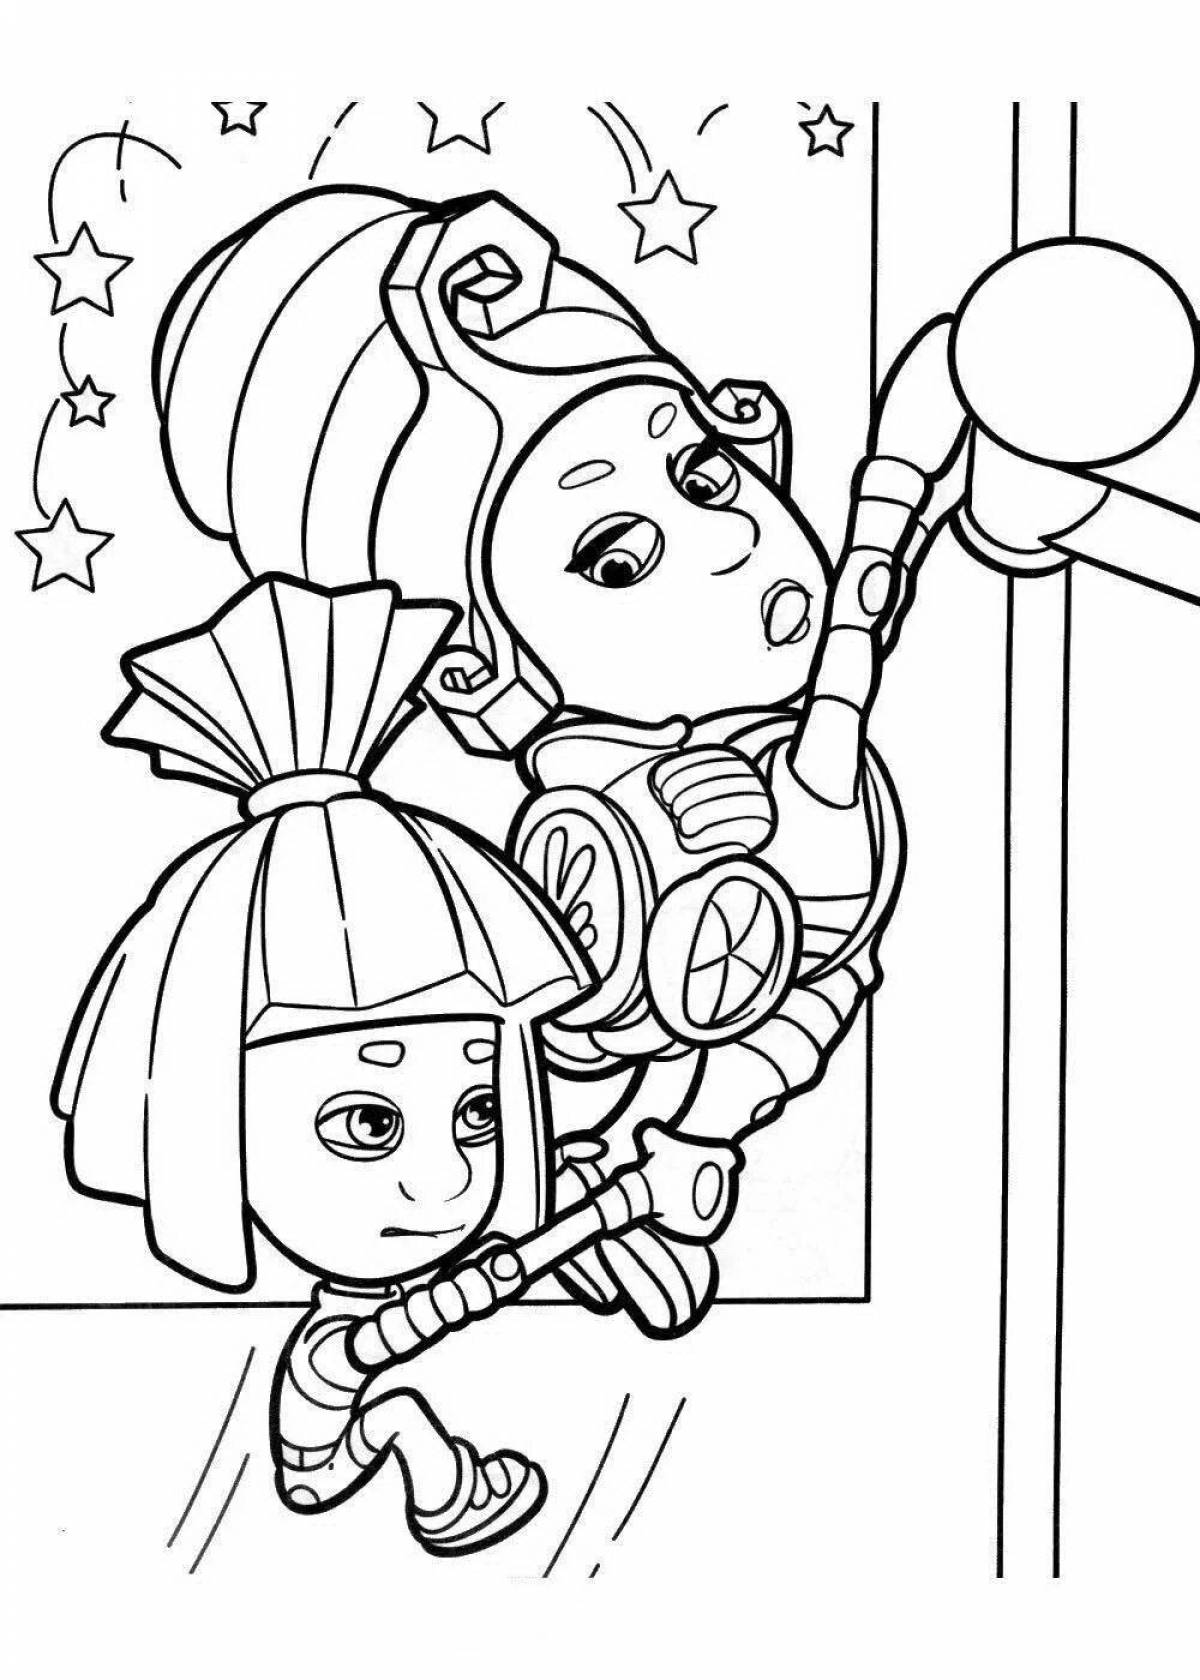 Fixies coloring page